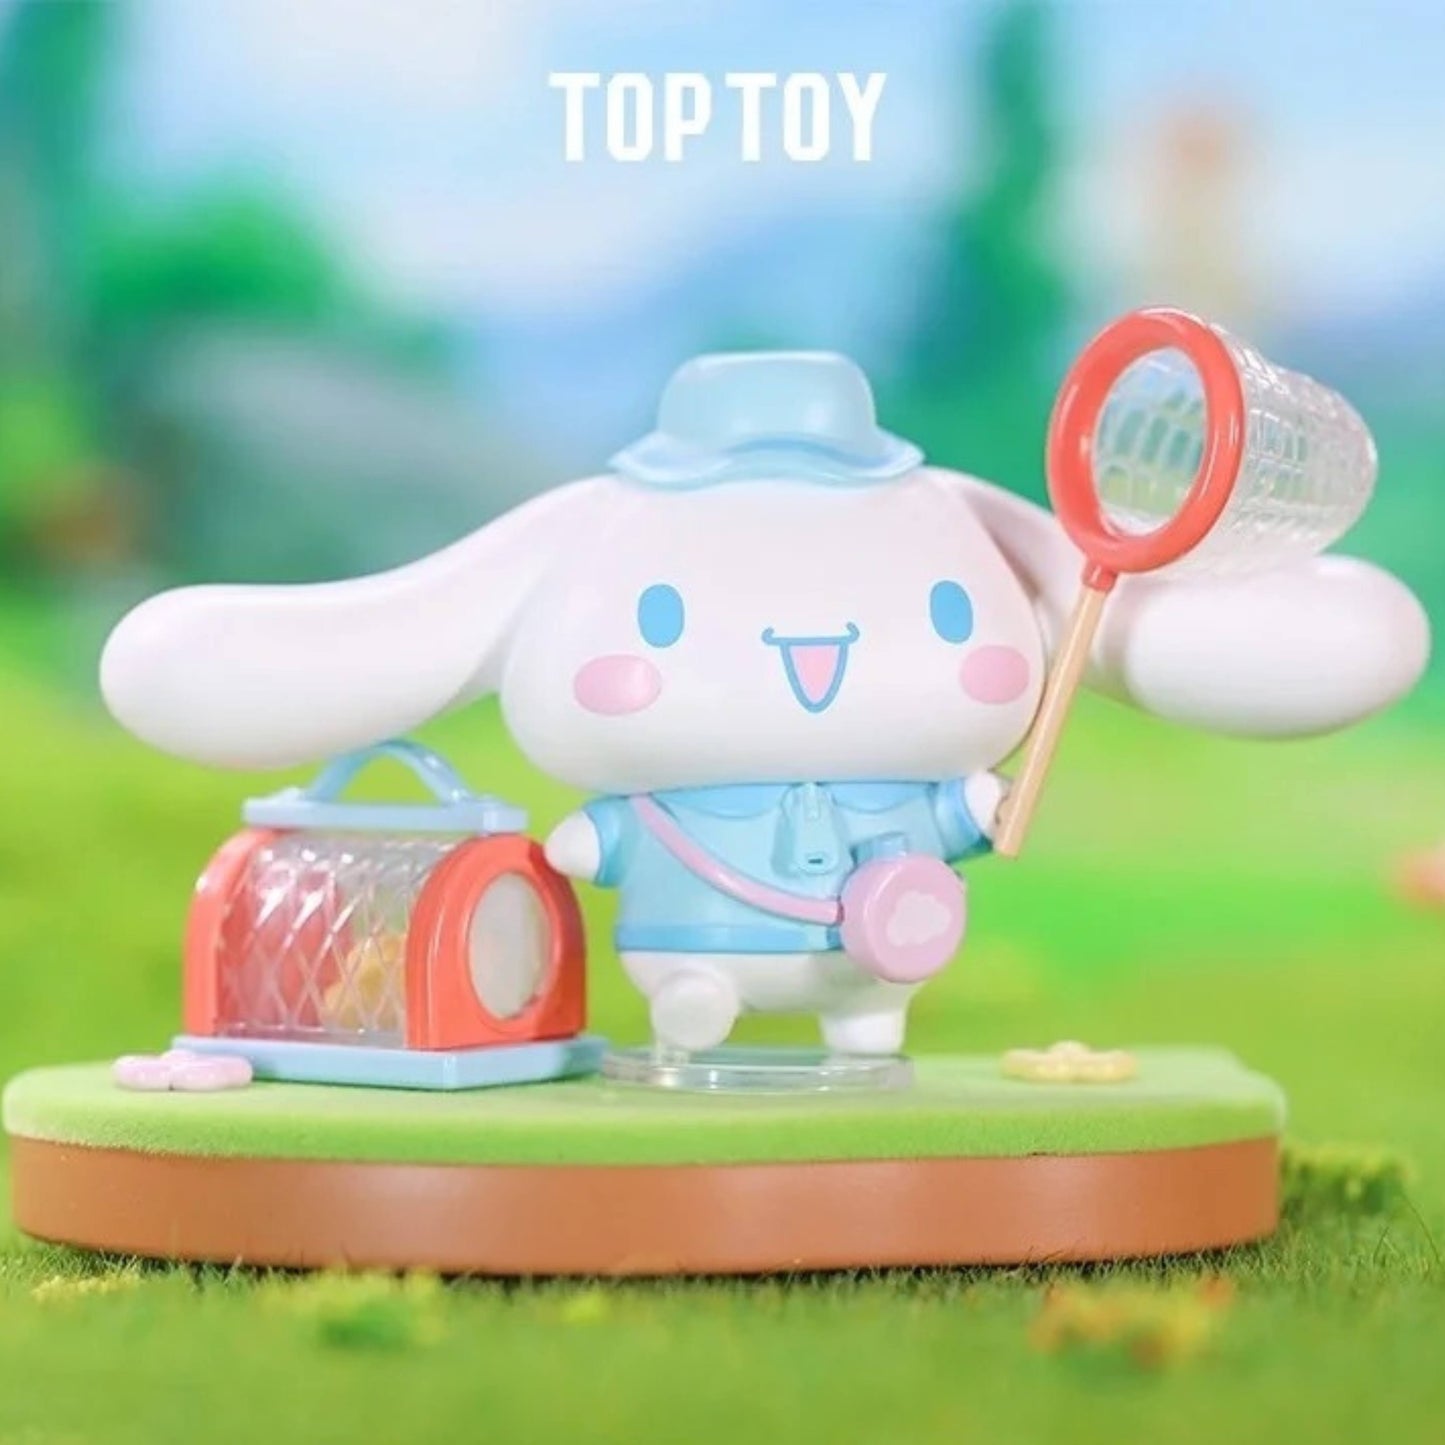 【Restock】Top Toy Sanrio Characters Camping Series Blind Box Random Style